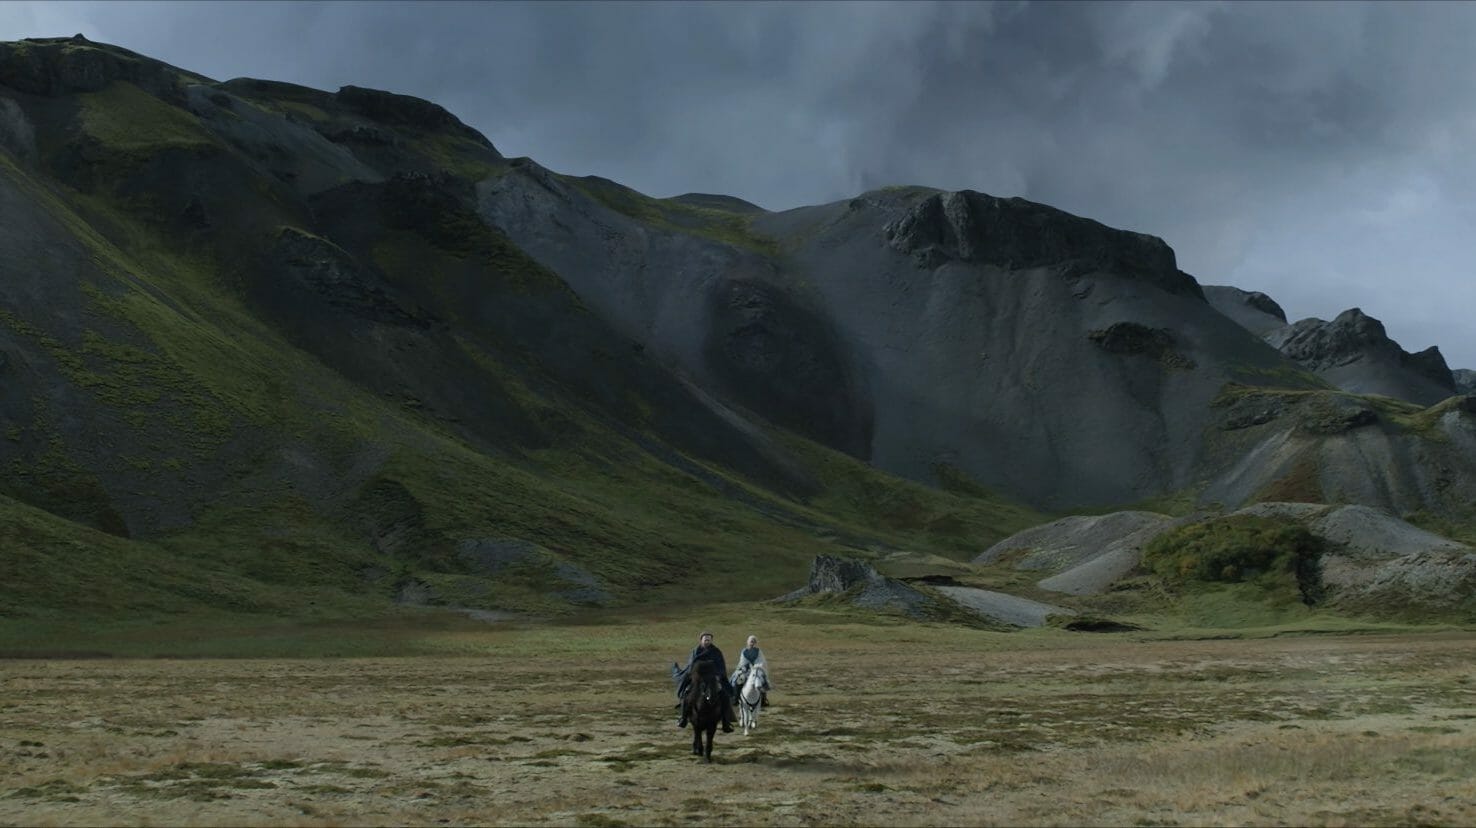 Alexander Skarsgård and Anya Taylor-Joy ride black and white stallions in front of dark charcoal mountains on Iceland's wide open grassy fields in THE NORTHMAN.  